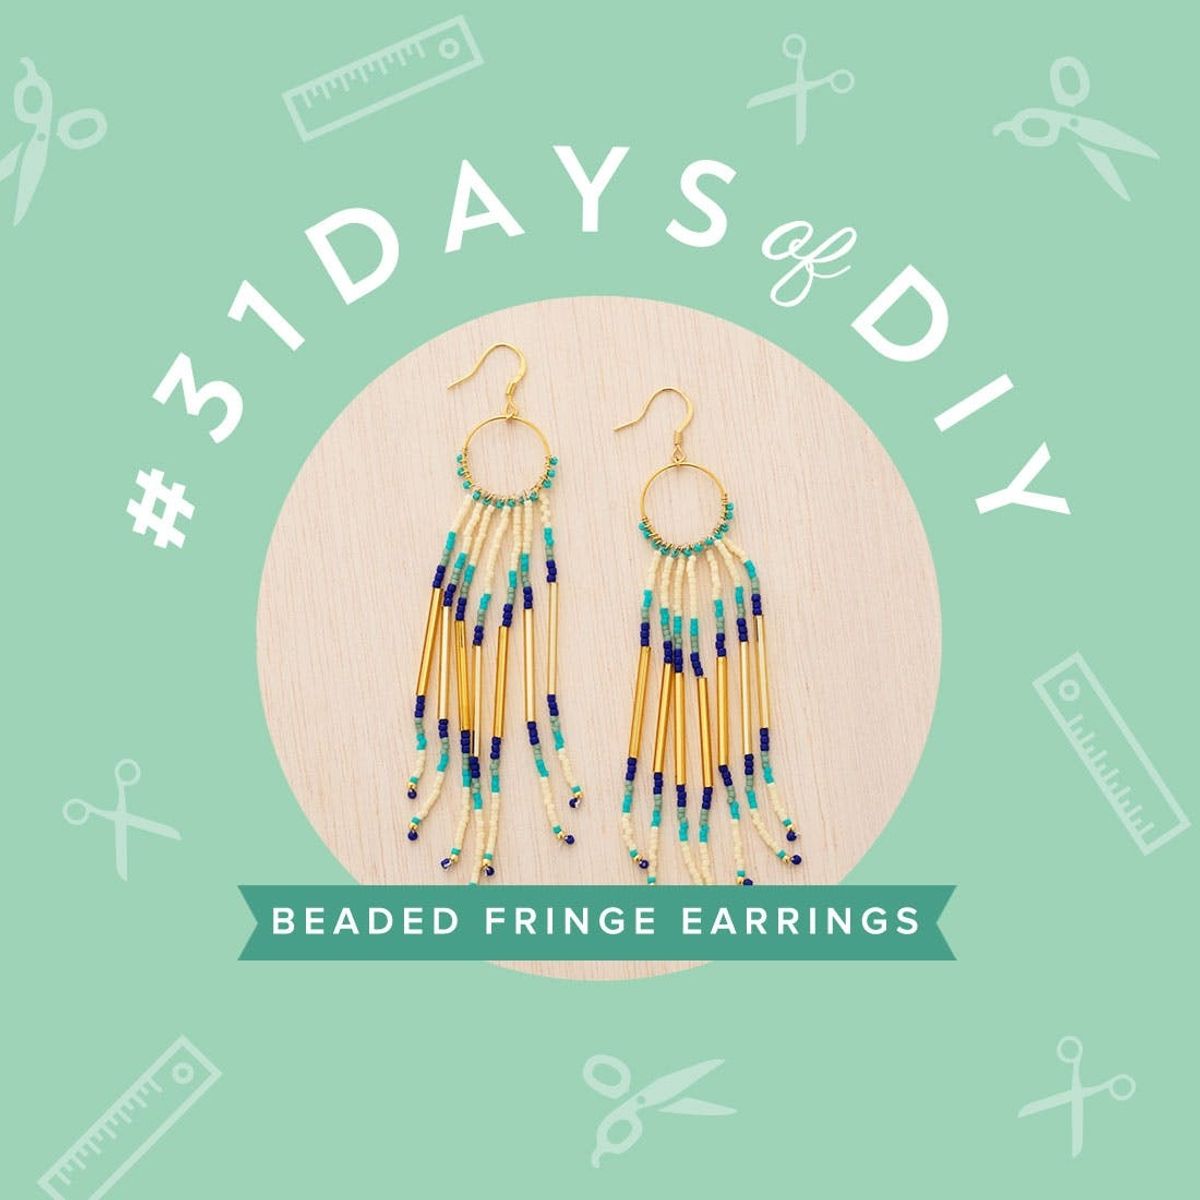 You Need to Make These Beaded Fringe Earrings